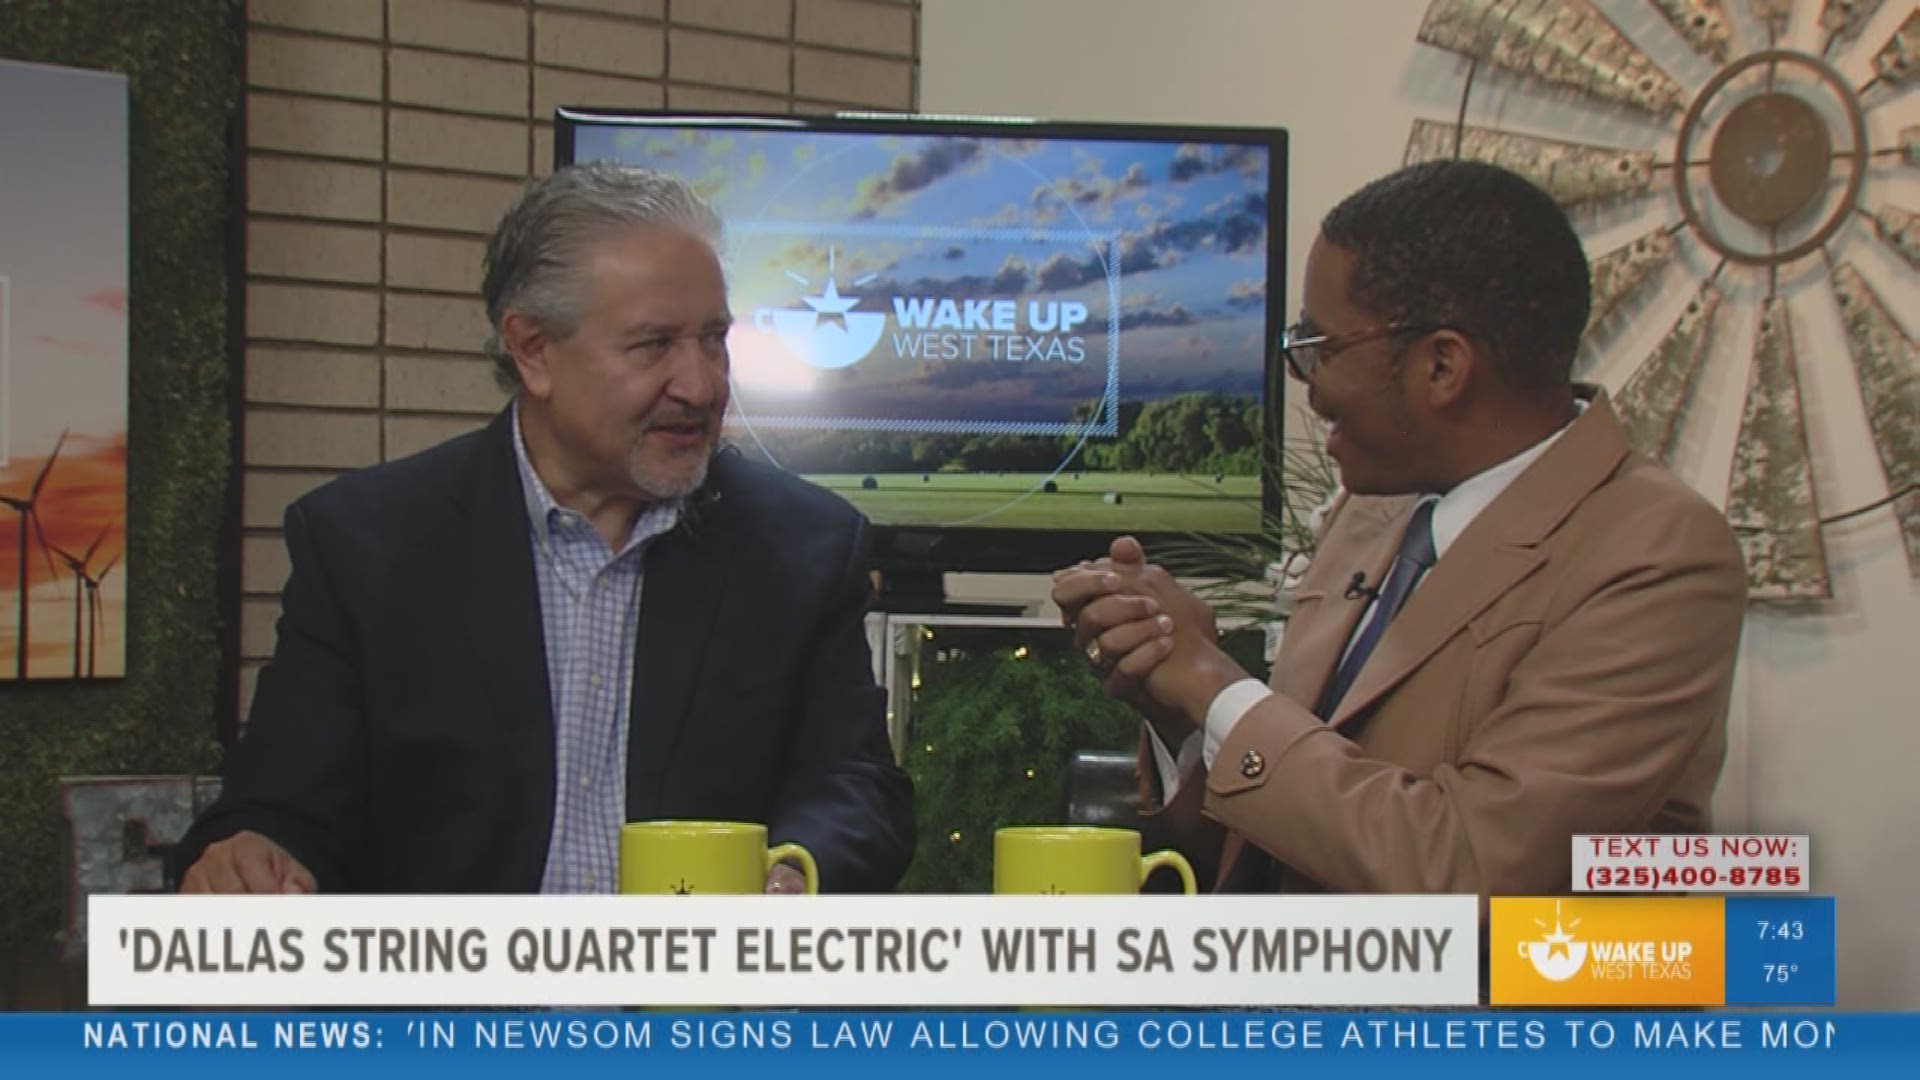 Our Malik Mingo spoke with the music conductor of the SA Symphony about the upcoming show on October 5 at the Murphey. Tickets: http://sanangelosymphony.org/